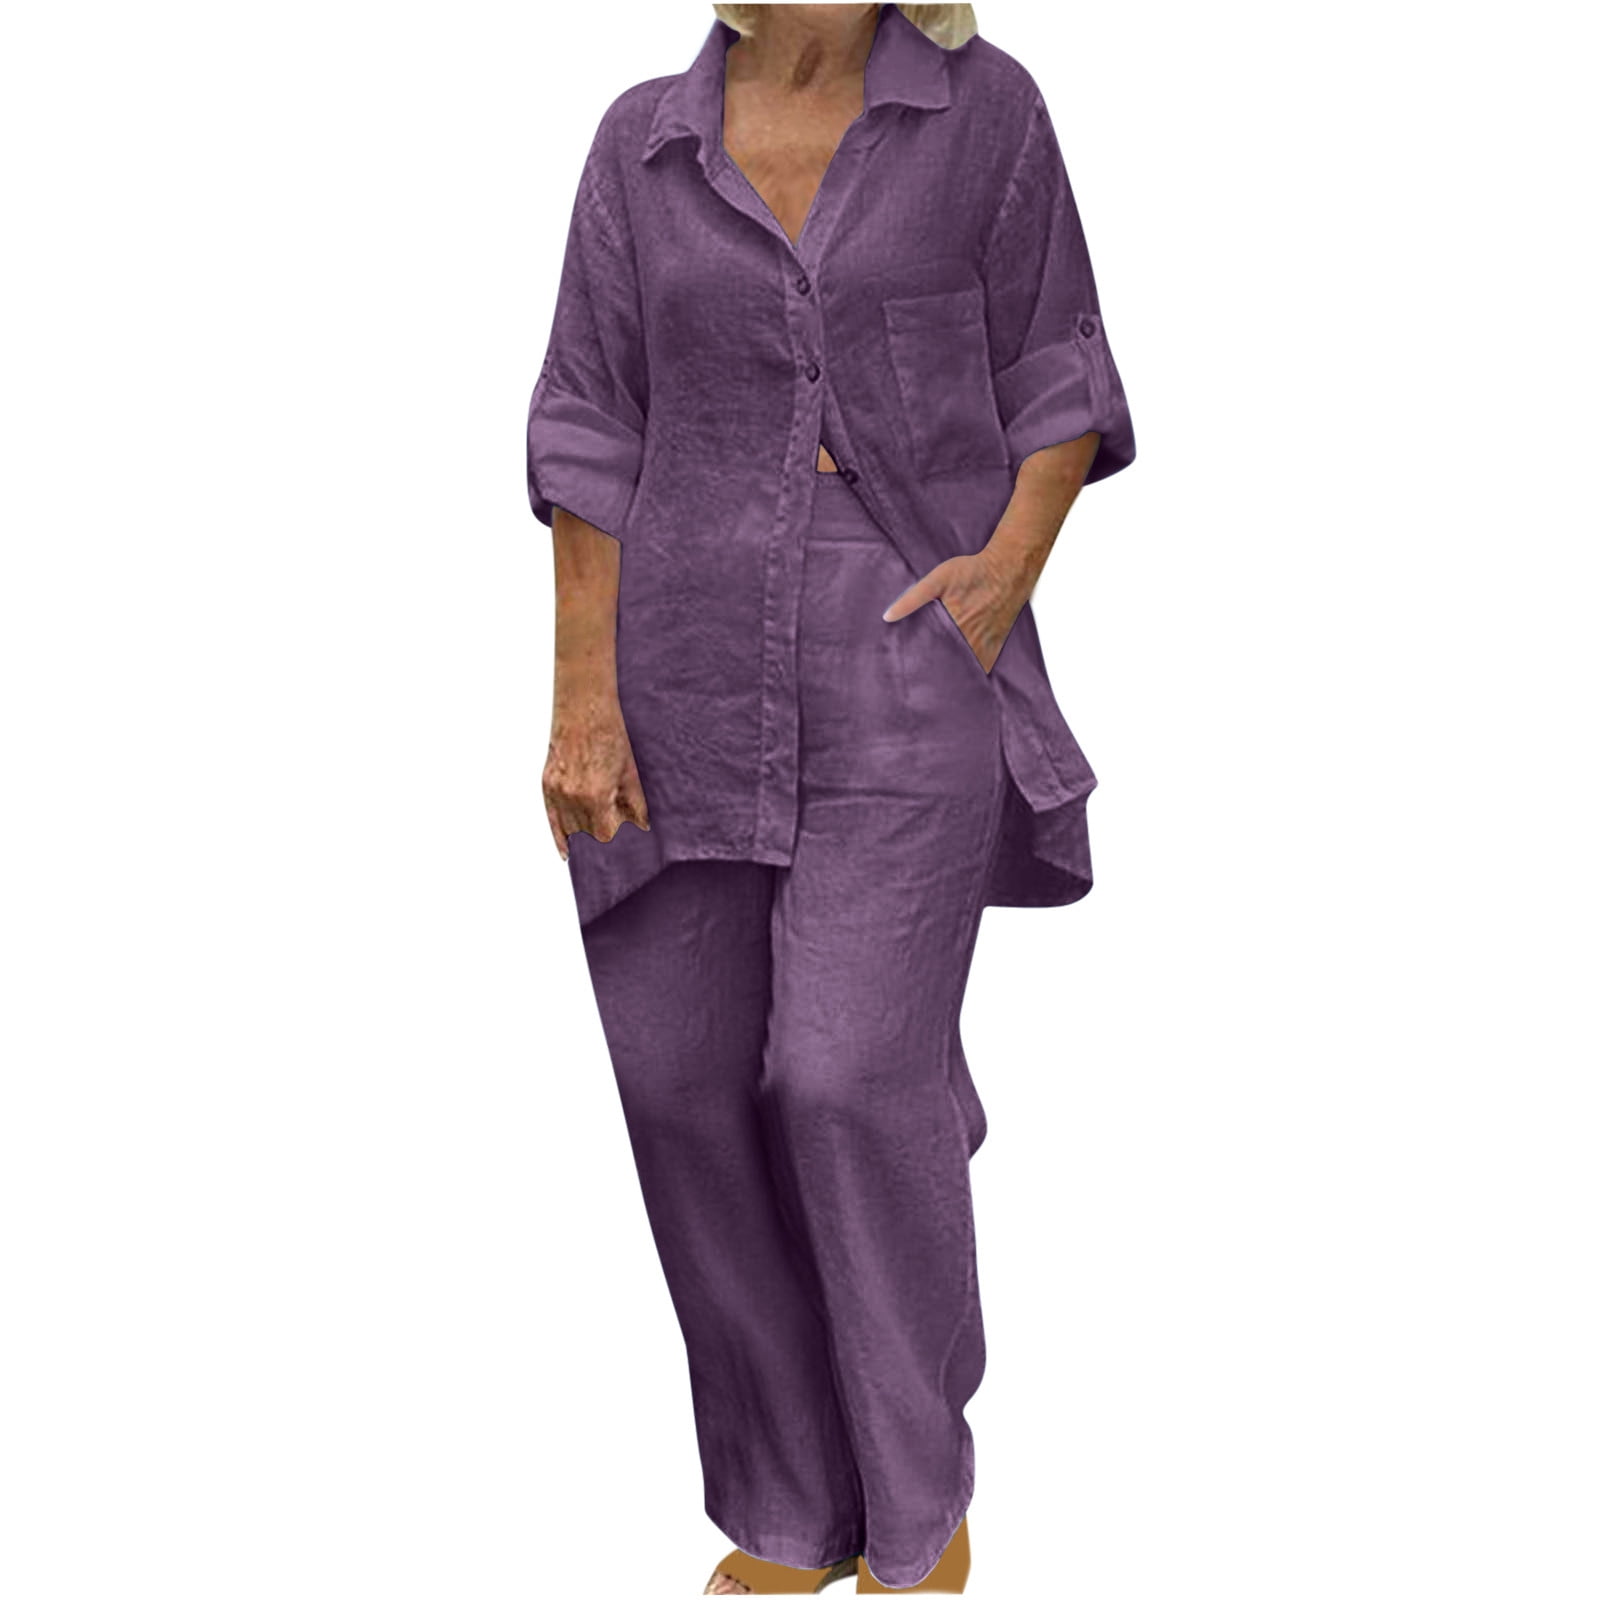 Edvintorg Women's Pajama Sets Cotton And Linen Long Sleeve Button Down ...